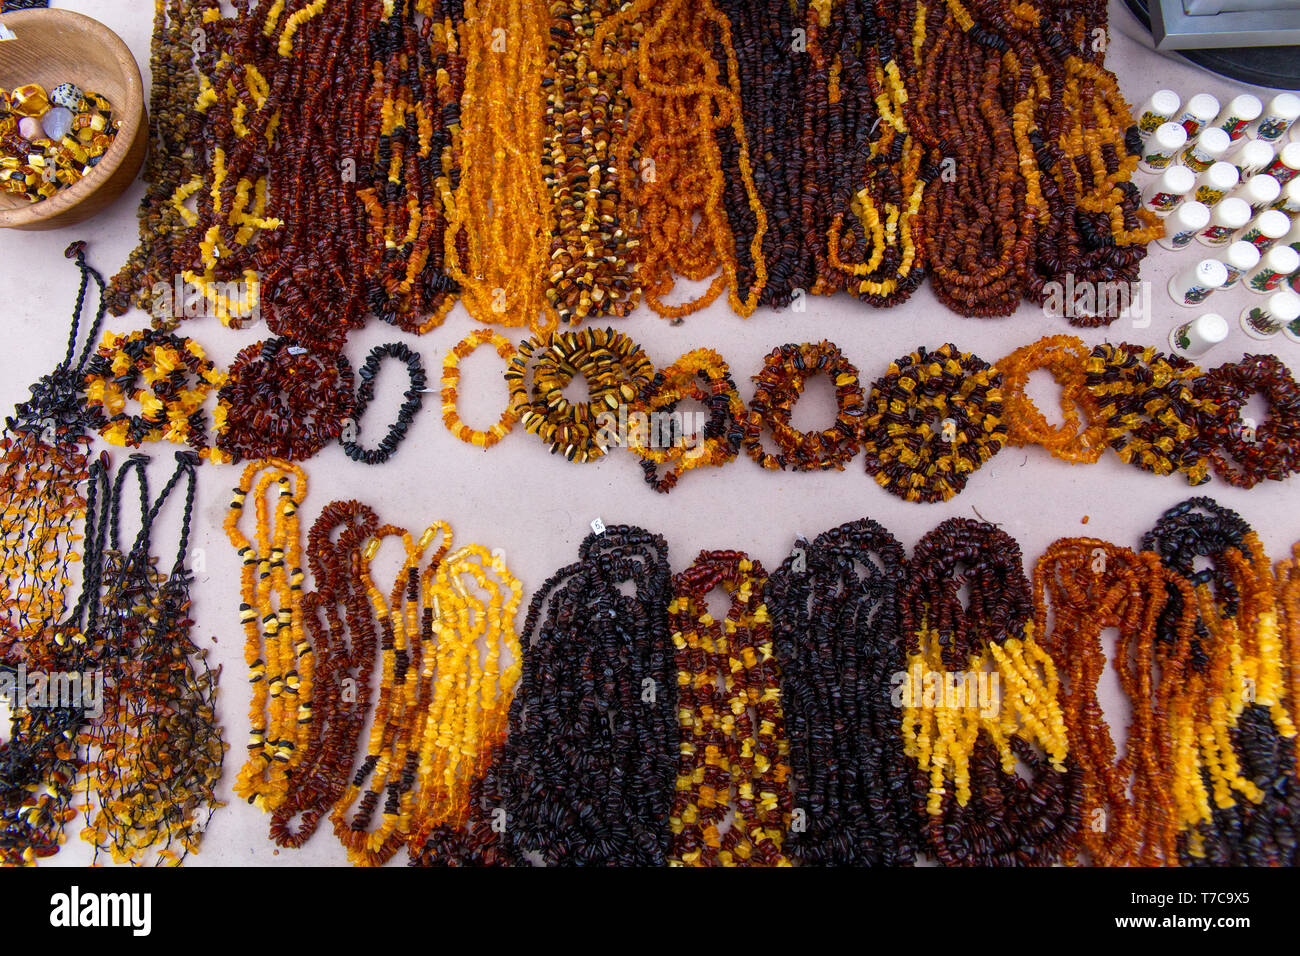 Trakai, Lithuania - Mart 17, 2019: Amber necklaces and souvenirs at the  street bazaar on promenade Stock Photo - Alamy